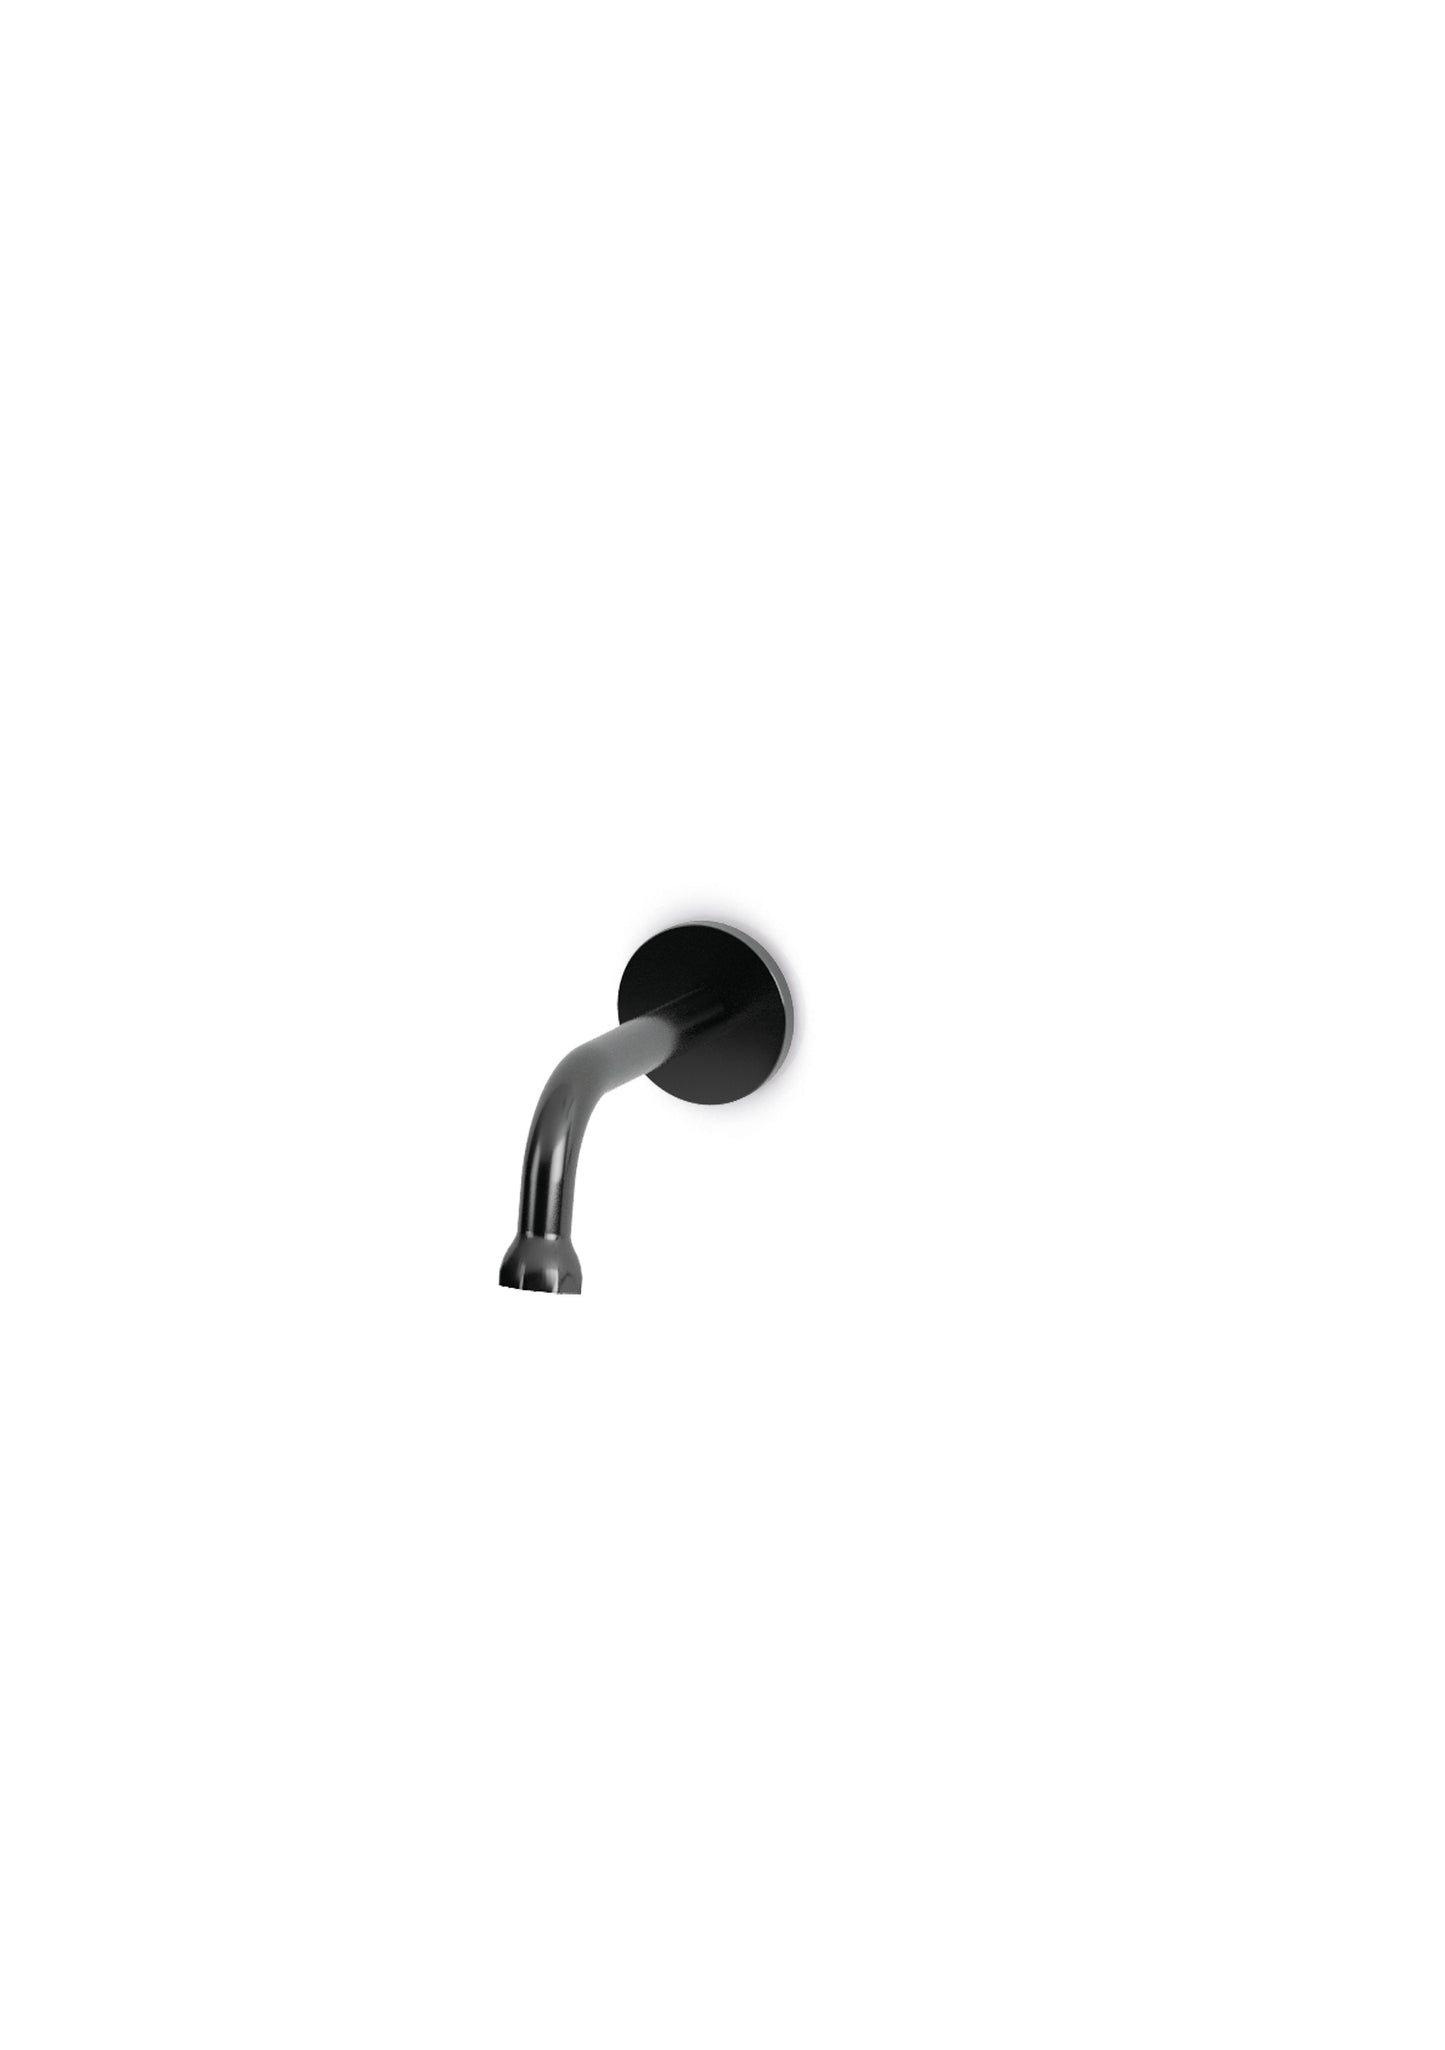 JEE-O Bloom Spout Long Wall Mounted Stainless Steel for Basin or Bath, Gun Metal